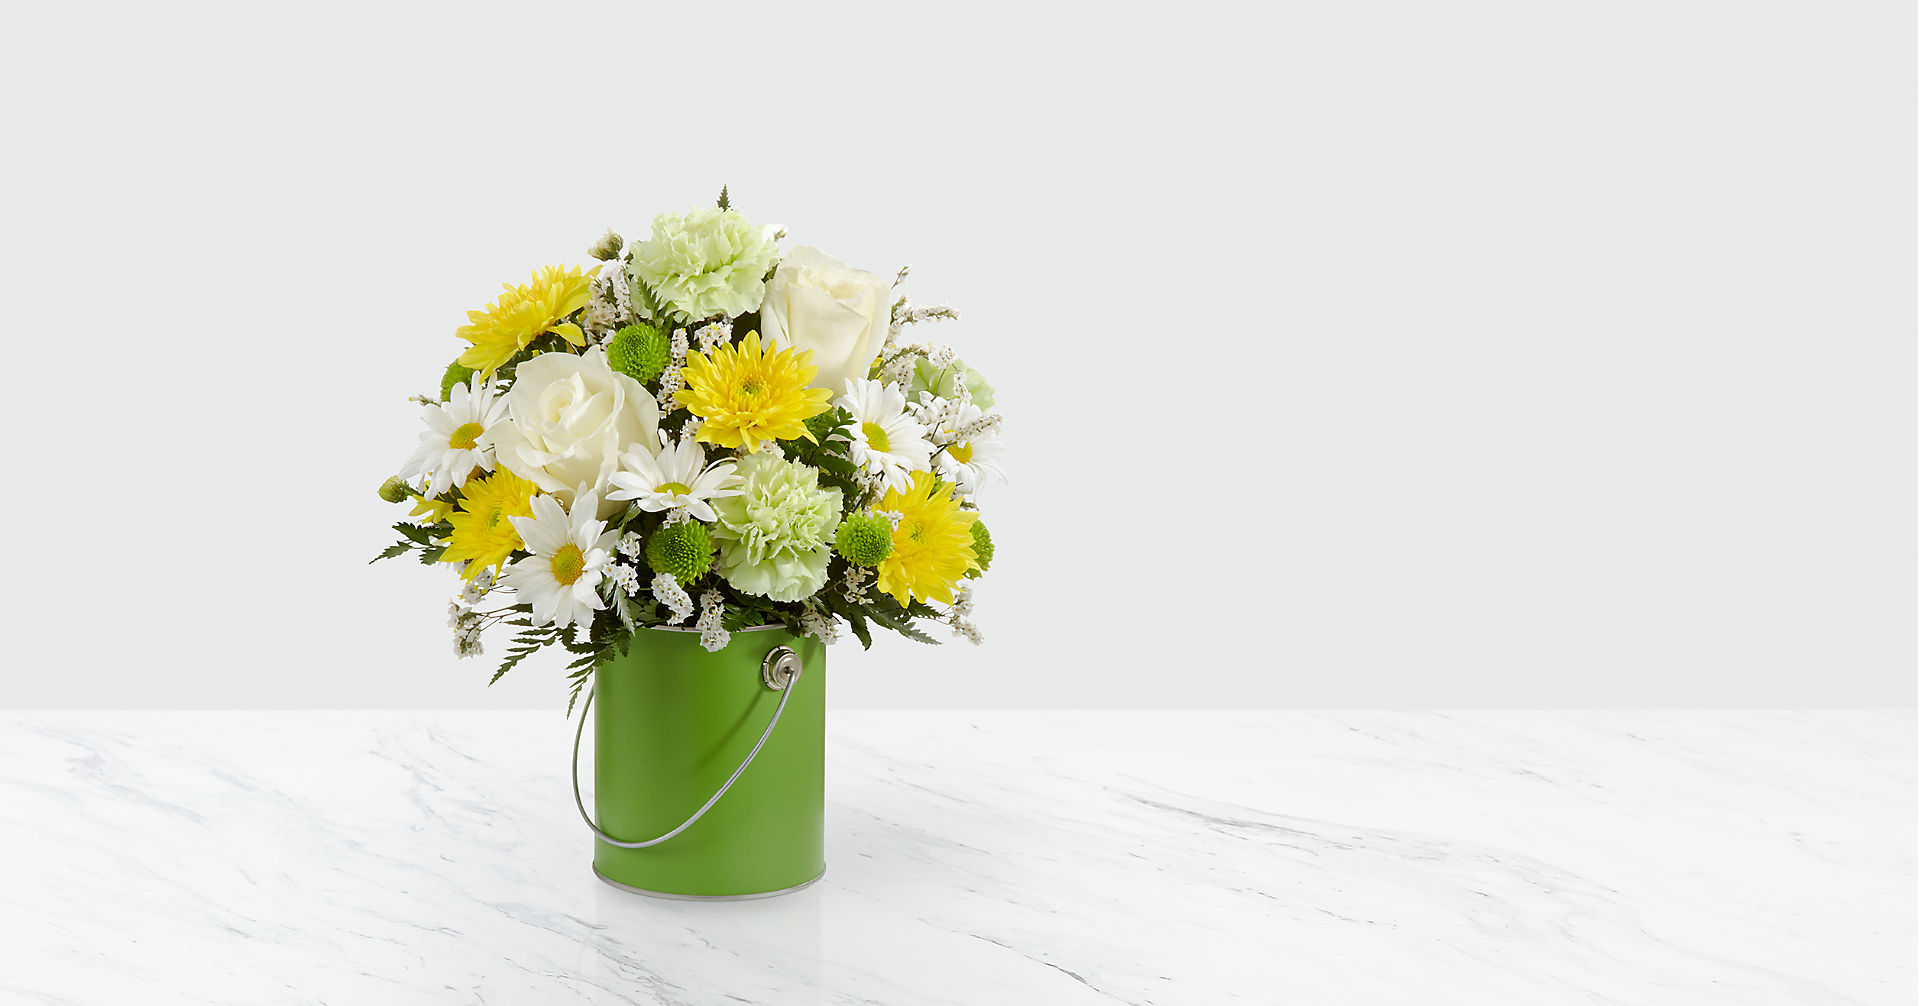 The Color Your Day With Joy™ Bouquet